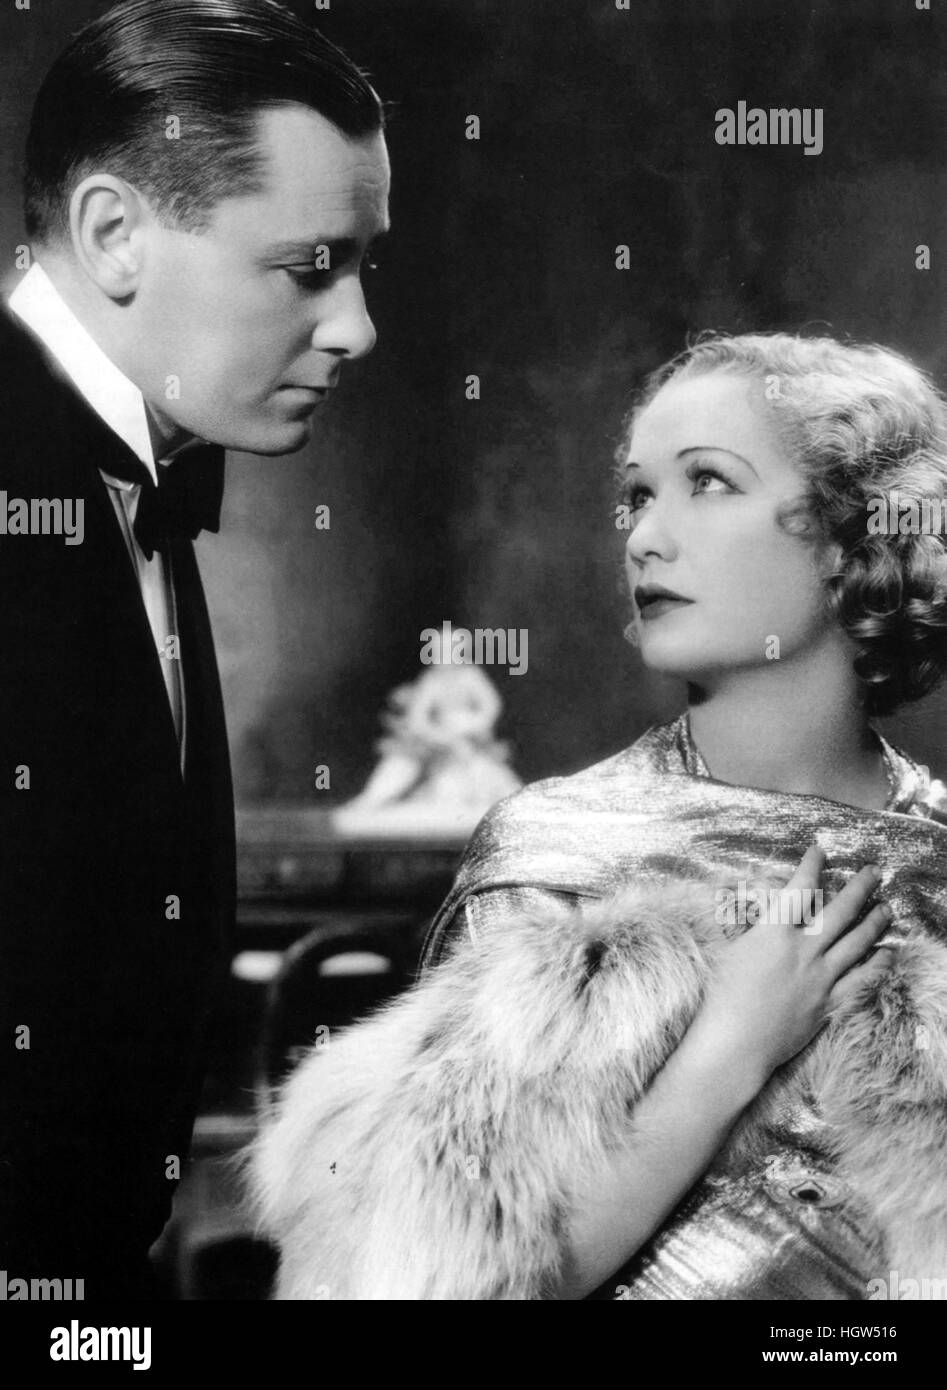 TROUBLE IN PARADISE 1932 Paramount Pictures film con Miriam Hopkins e Herbert Marshall Foto Stock